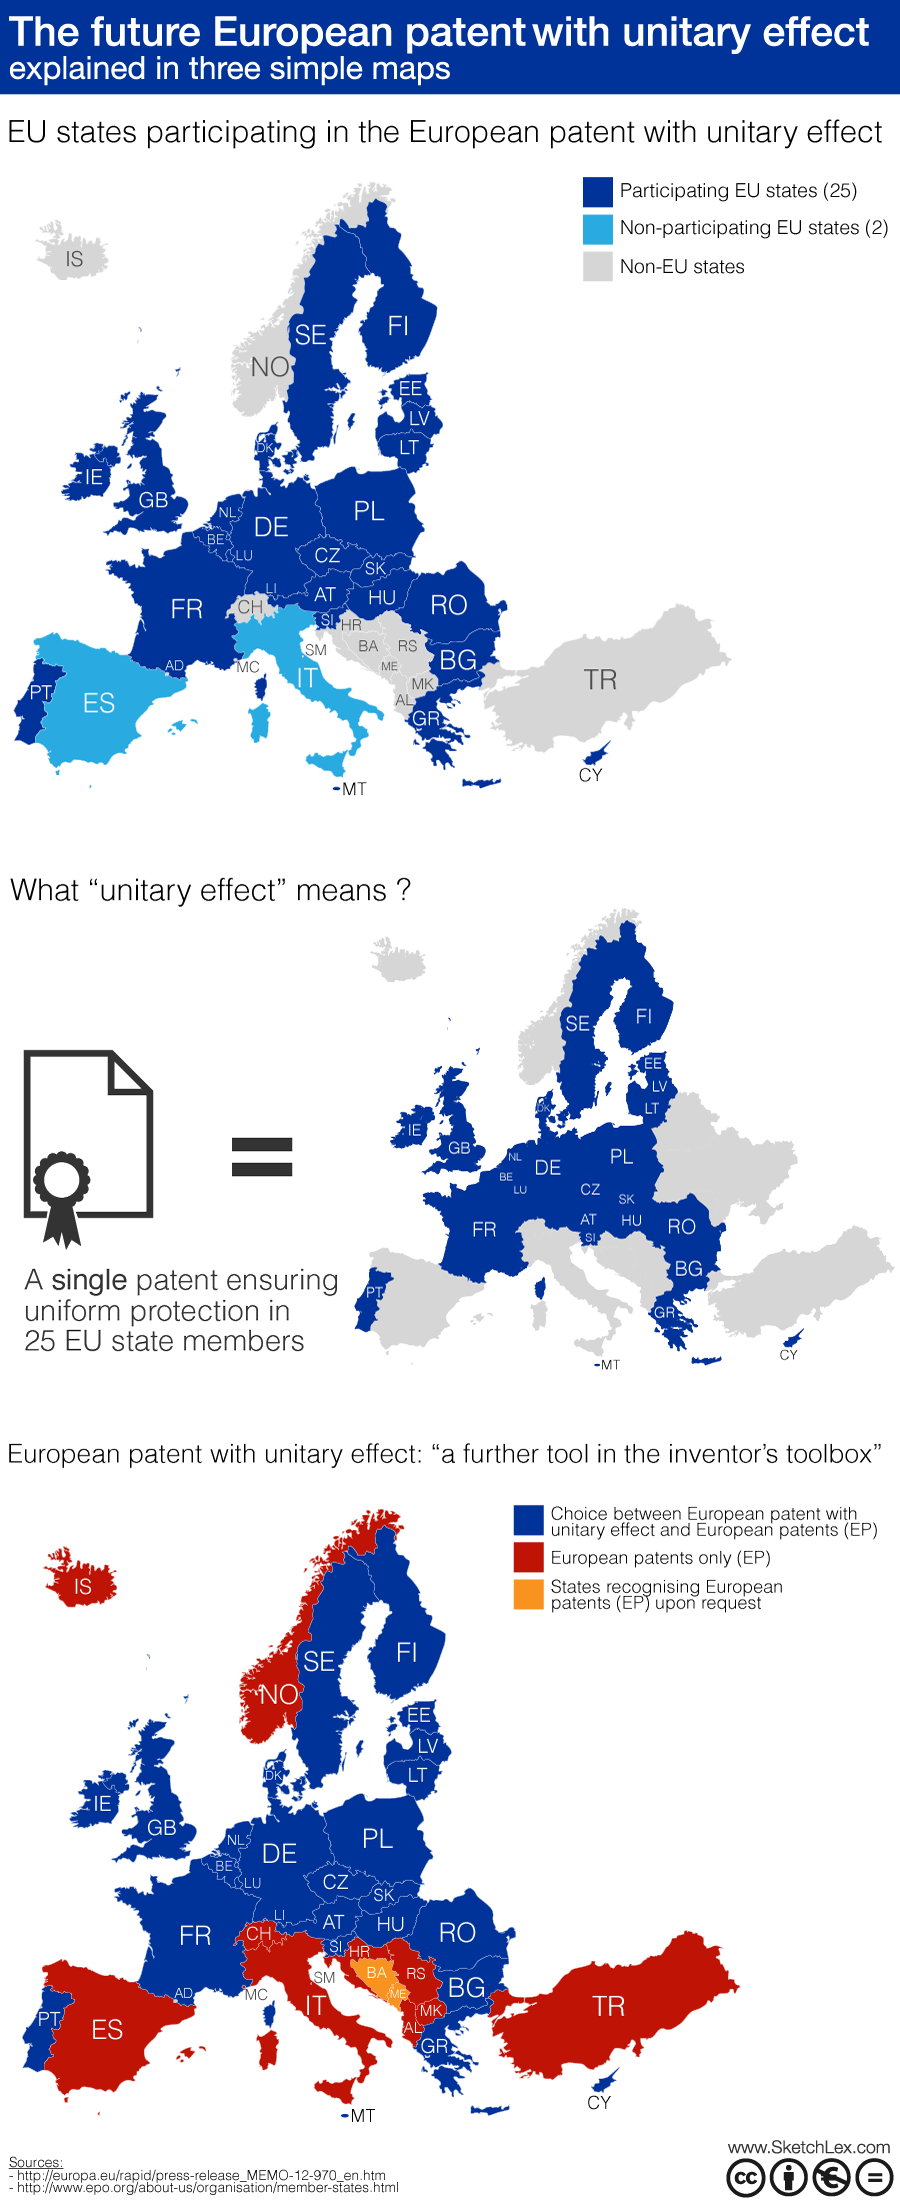 The future European patent with unitary effect explained in three simple maps